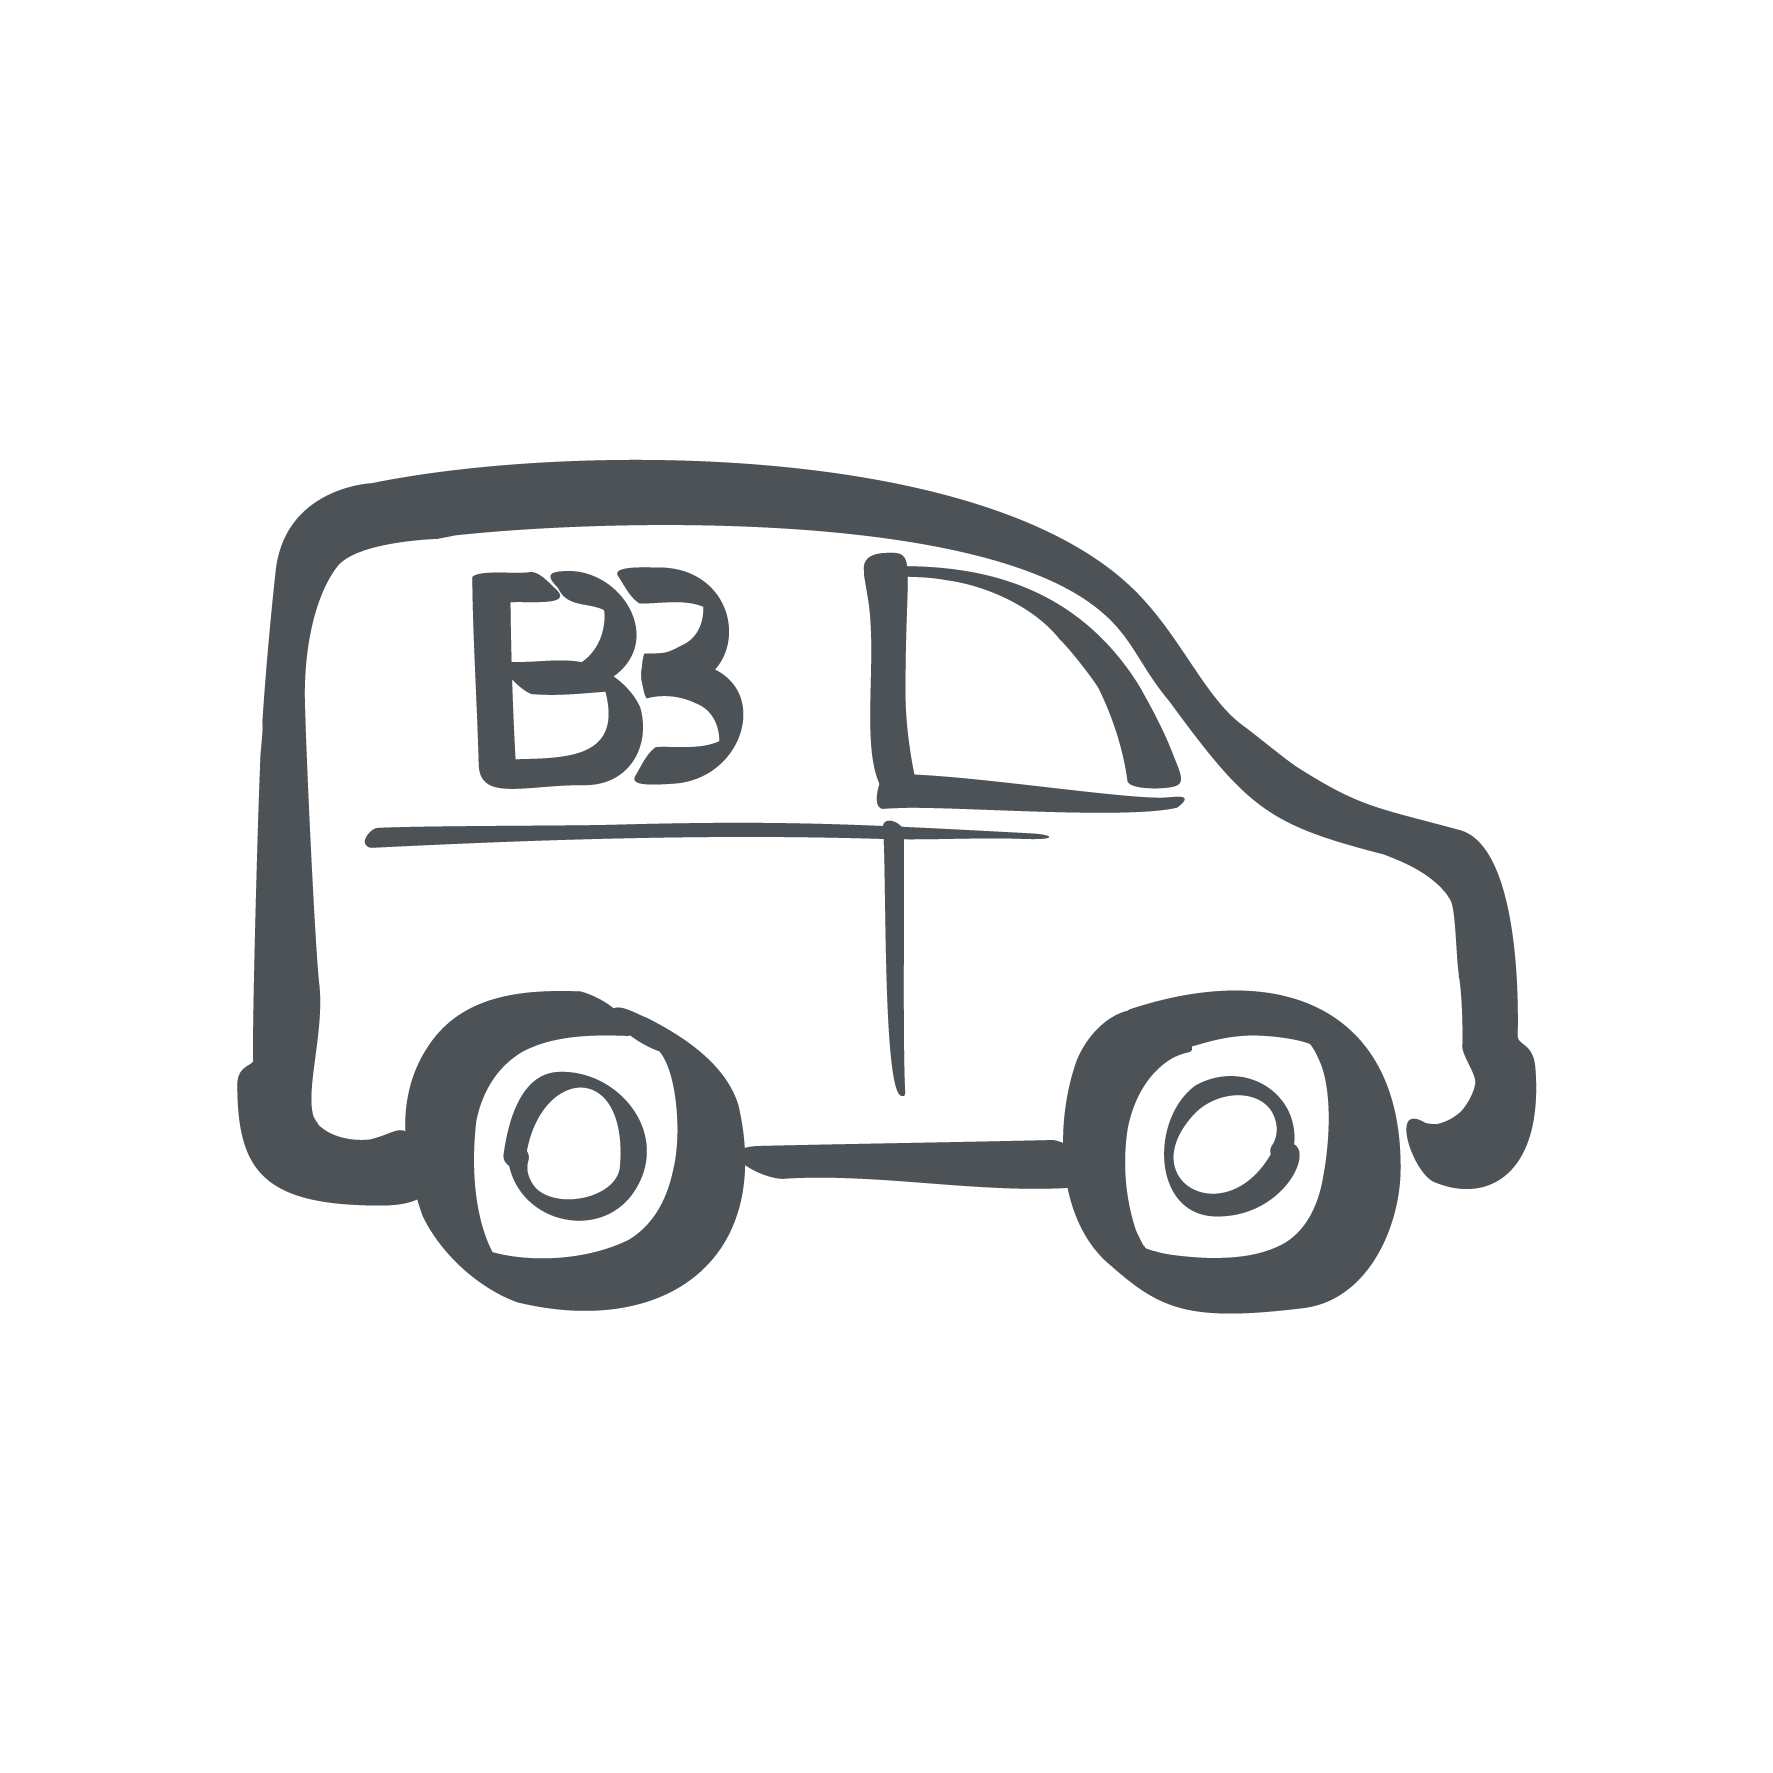 Icon of a branded B3Living van